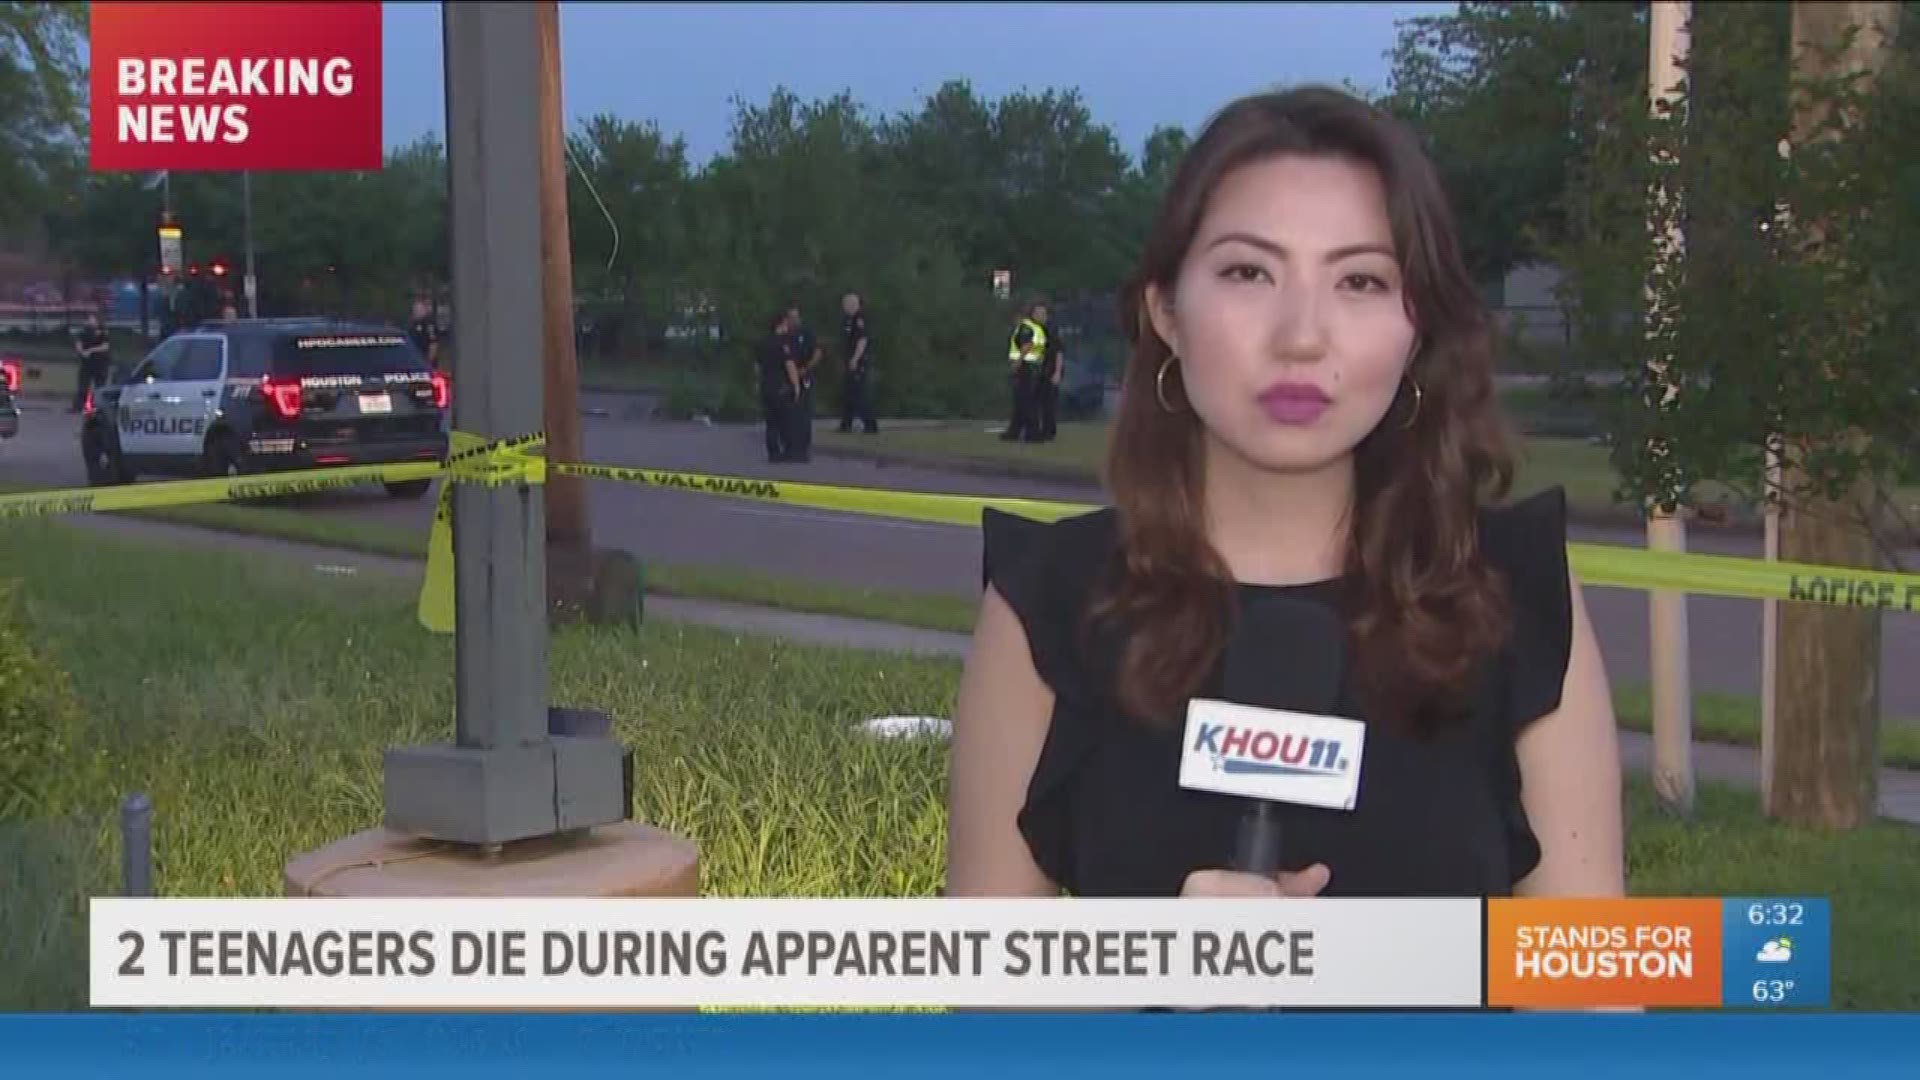 KHOU 11 News This Morning has the day's headlines